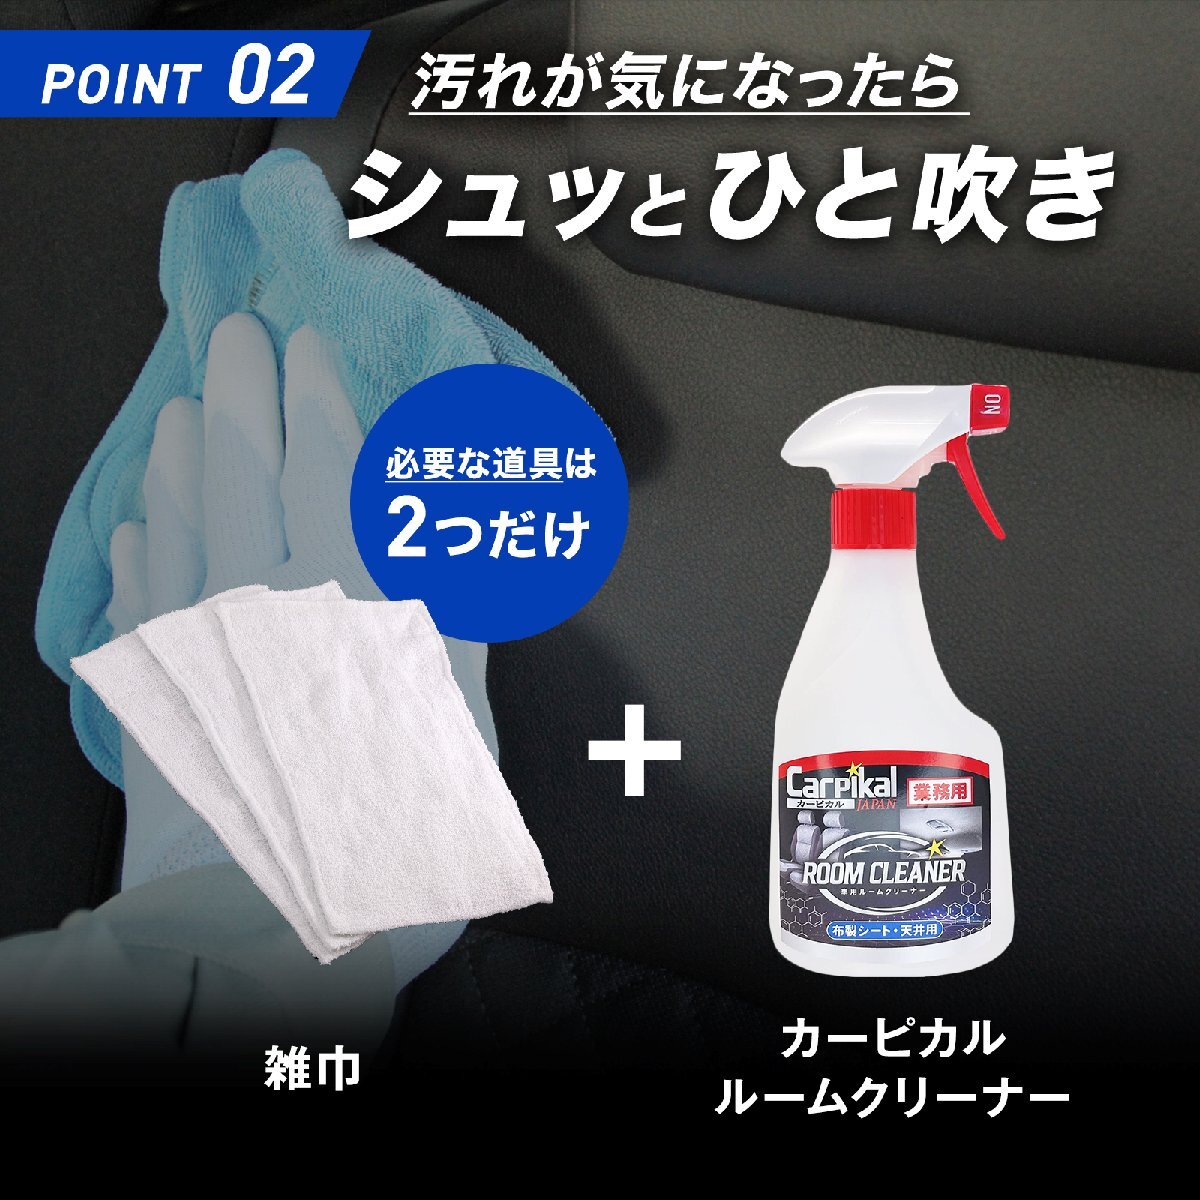  car pikaru car seat ceiling dirt dropping spray / business use room cleaner 500ml